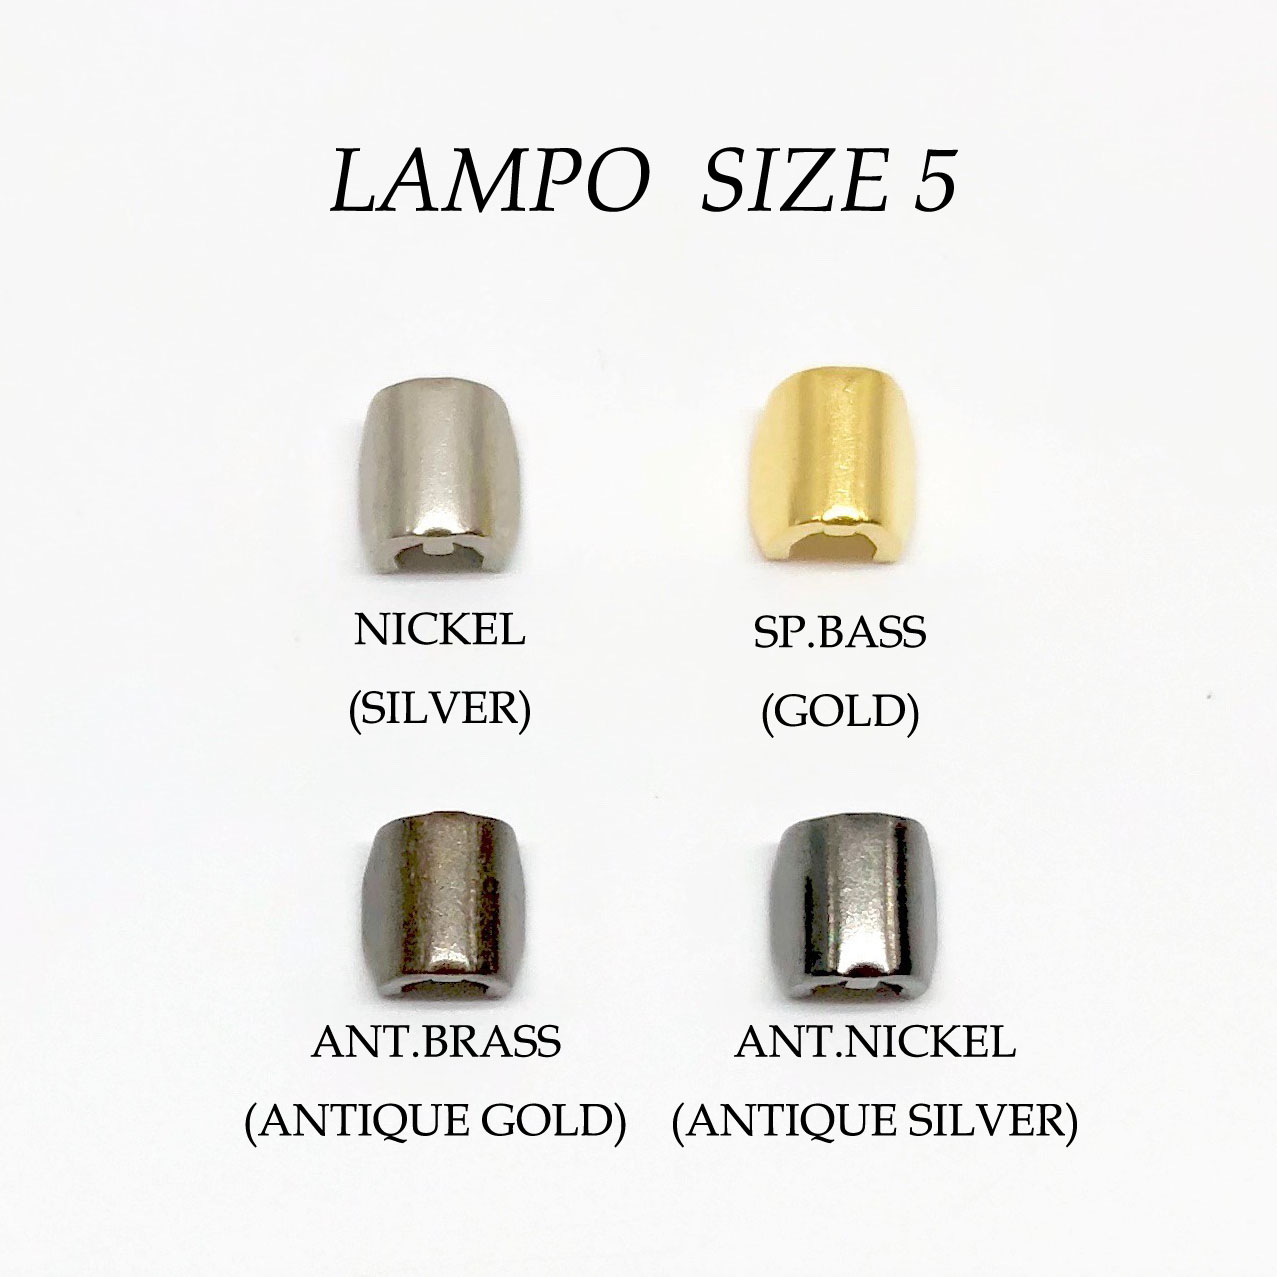 083S Super LAMPO Zipper Top Stop For Size 5 Only LAMPO(GIOVANNI LANFRANCHI SPA)